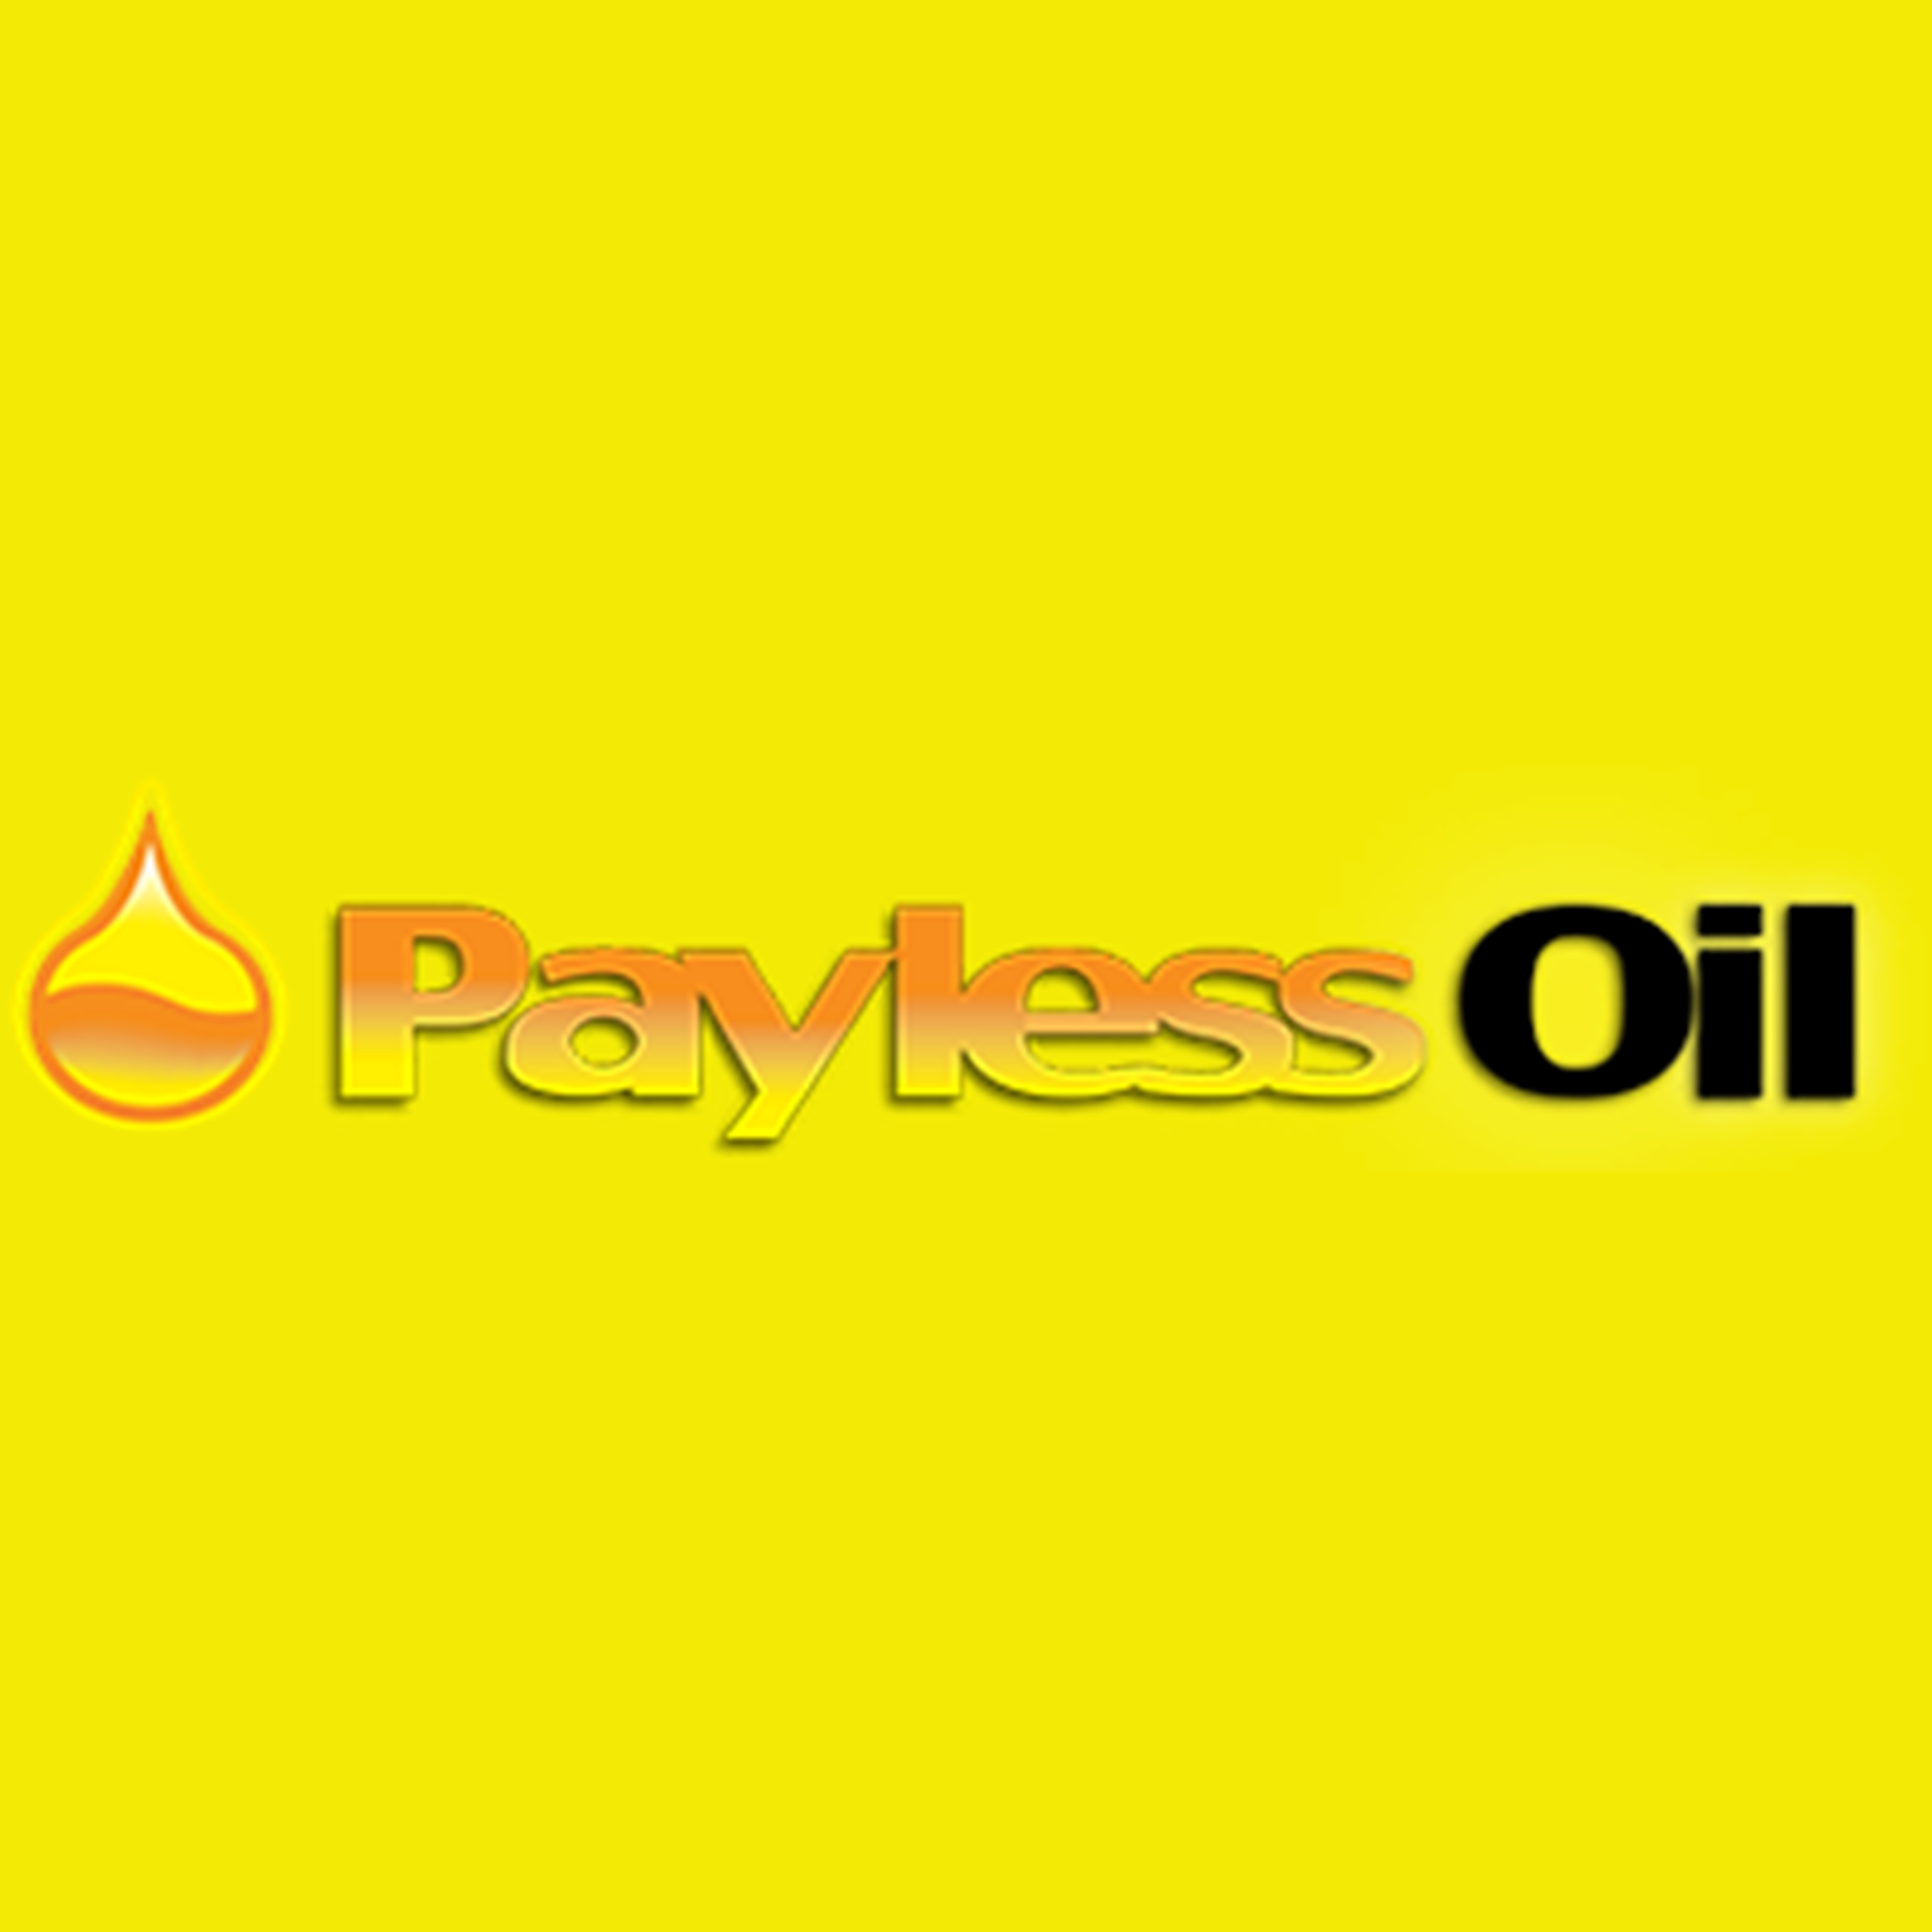 Payless Oil 462 Main St Ste A Royersford PA Oils Fuel MapQuest